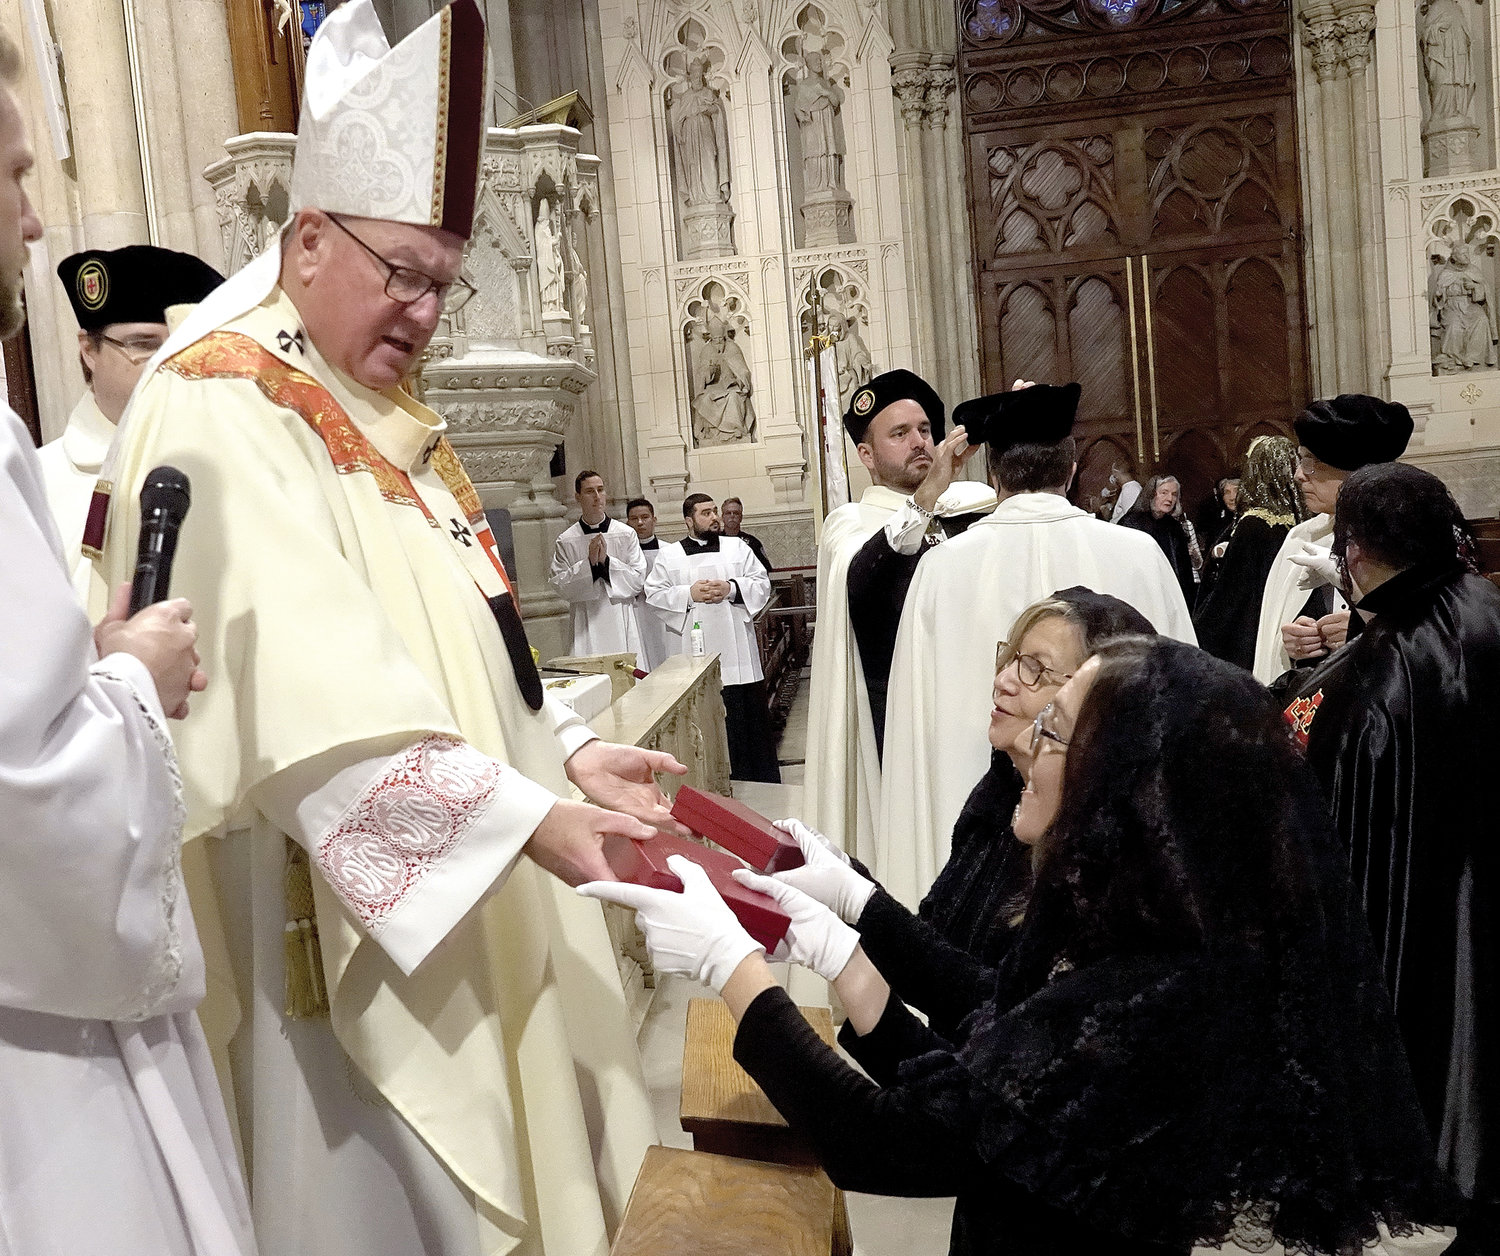 WELCOME—Cardinal Dolan offers congratulations and makes a presentation to two newly invested dames of the Equestrian Order of the Holy Sepulchre of Jesusalem’s Eastern Lieutenancy of the United States at a ceremony and Mass at St. Patrick’s Cathedral Oct. 16.